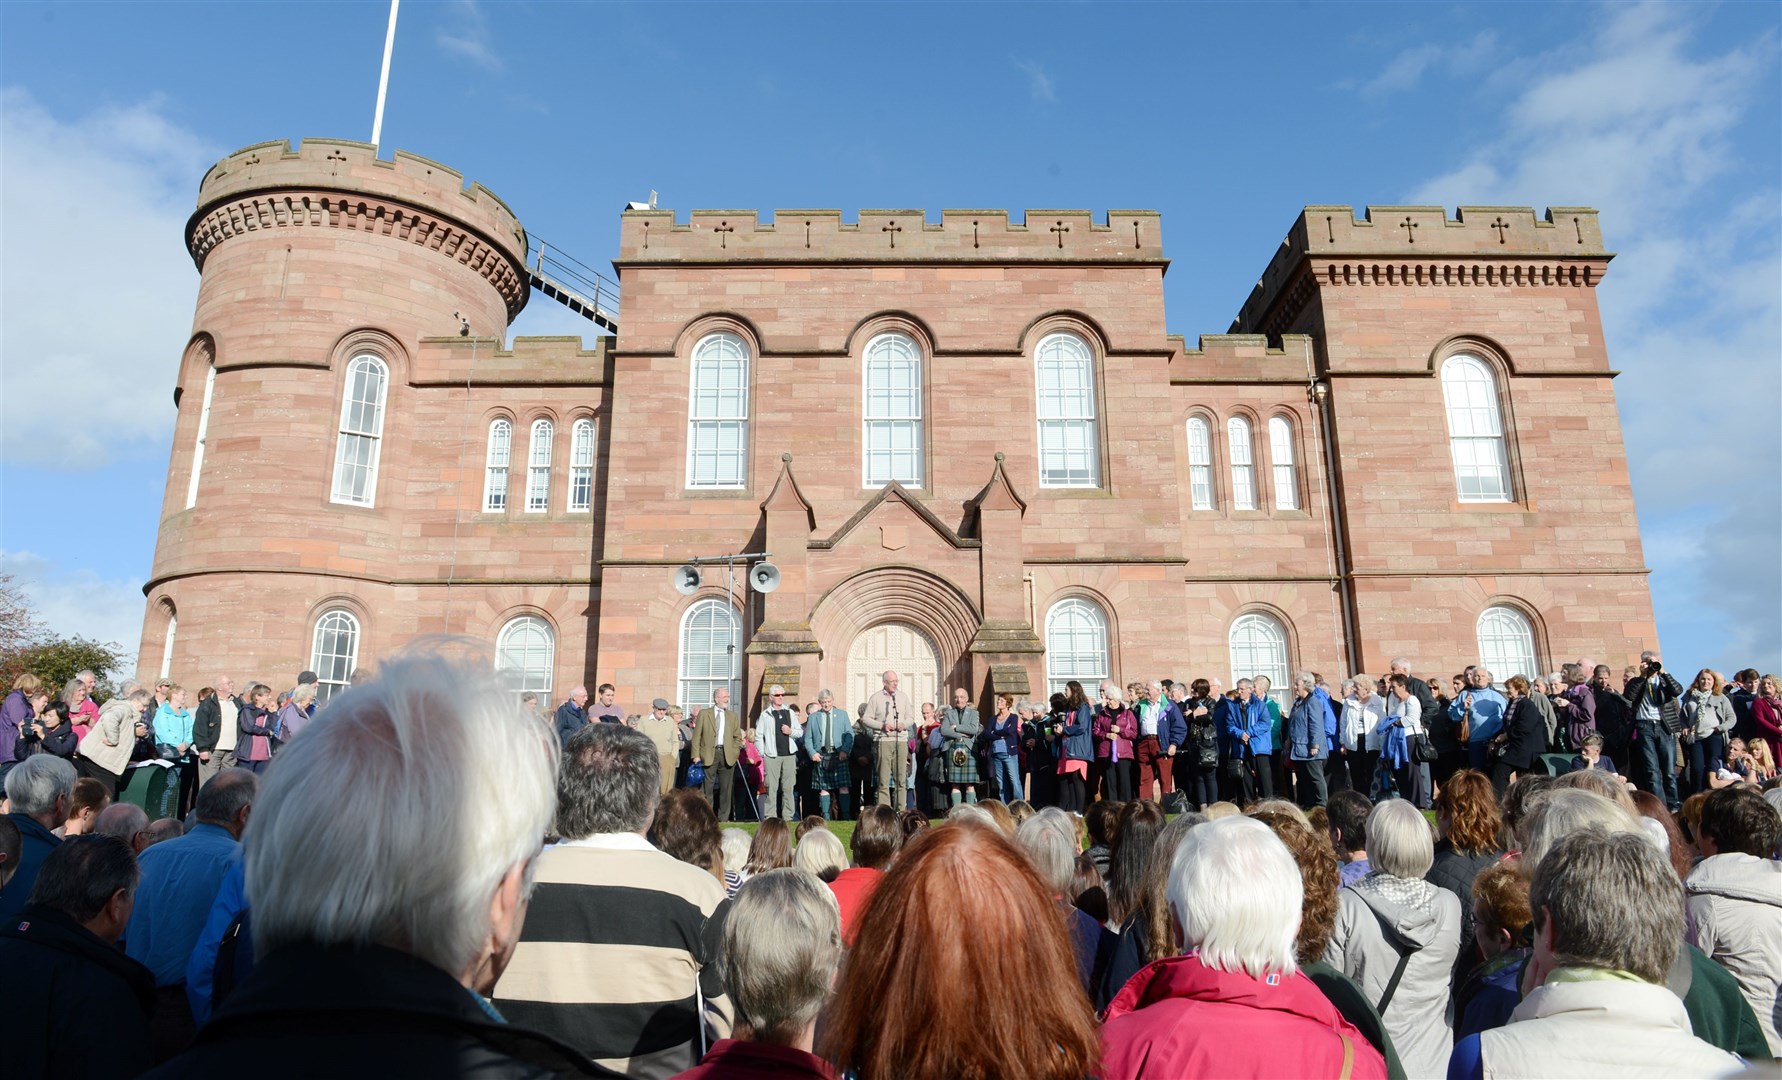 The massed choirs of the Royal National Mod 2014 outside Inverness Castle provided a wonderful finale to the renowned Gaelic music event.